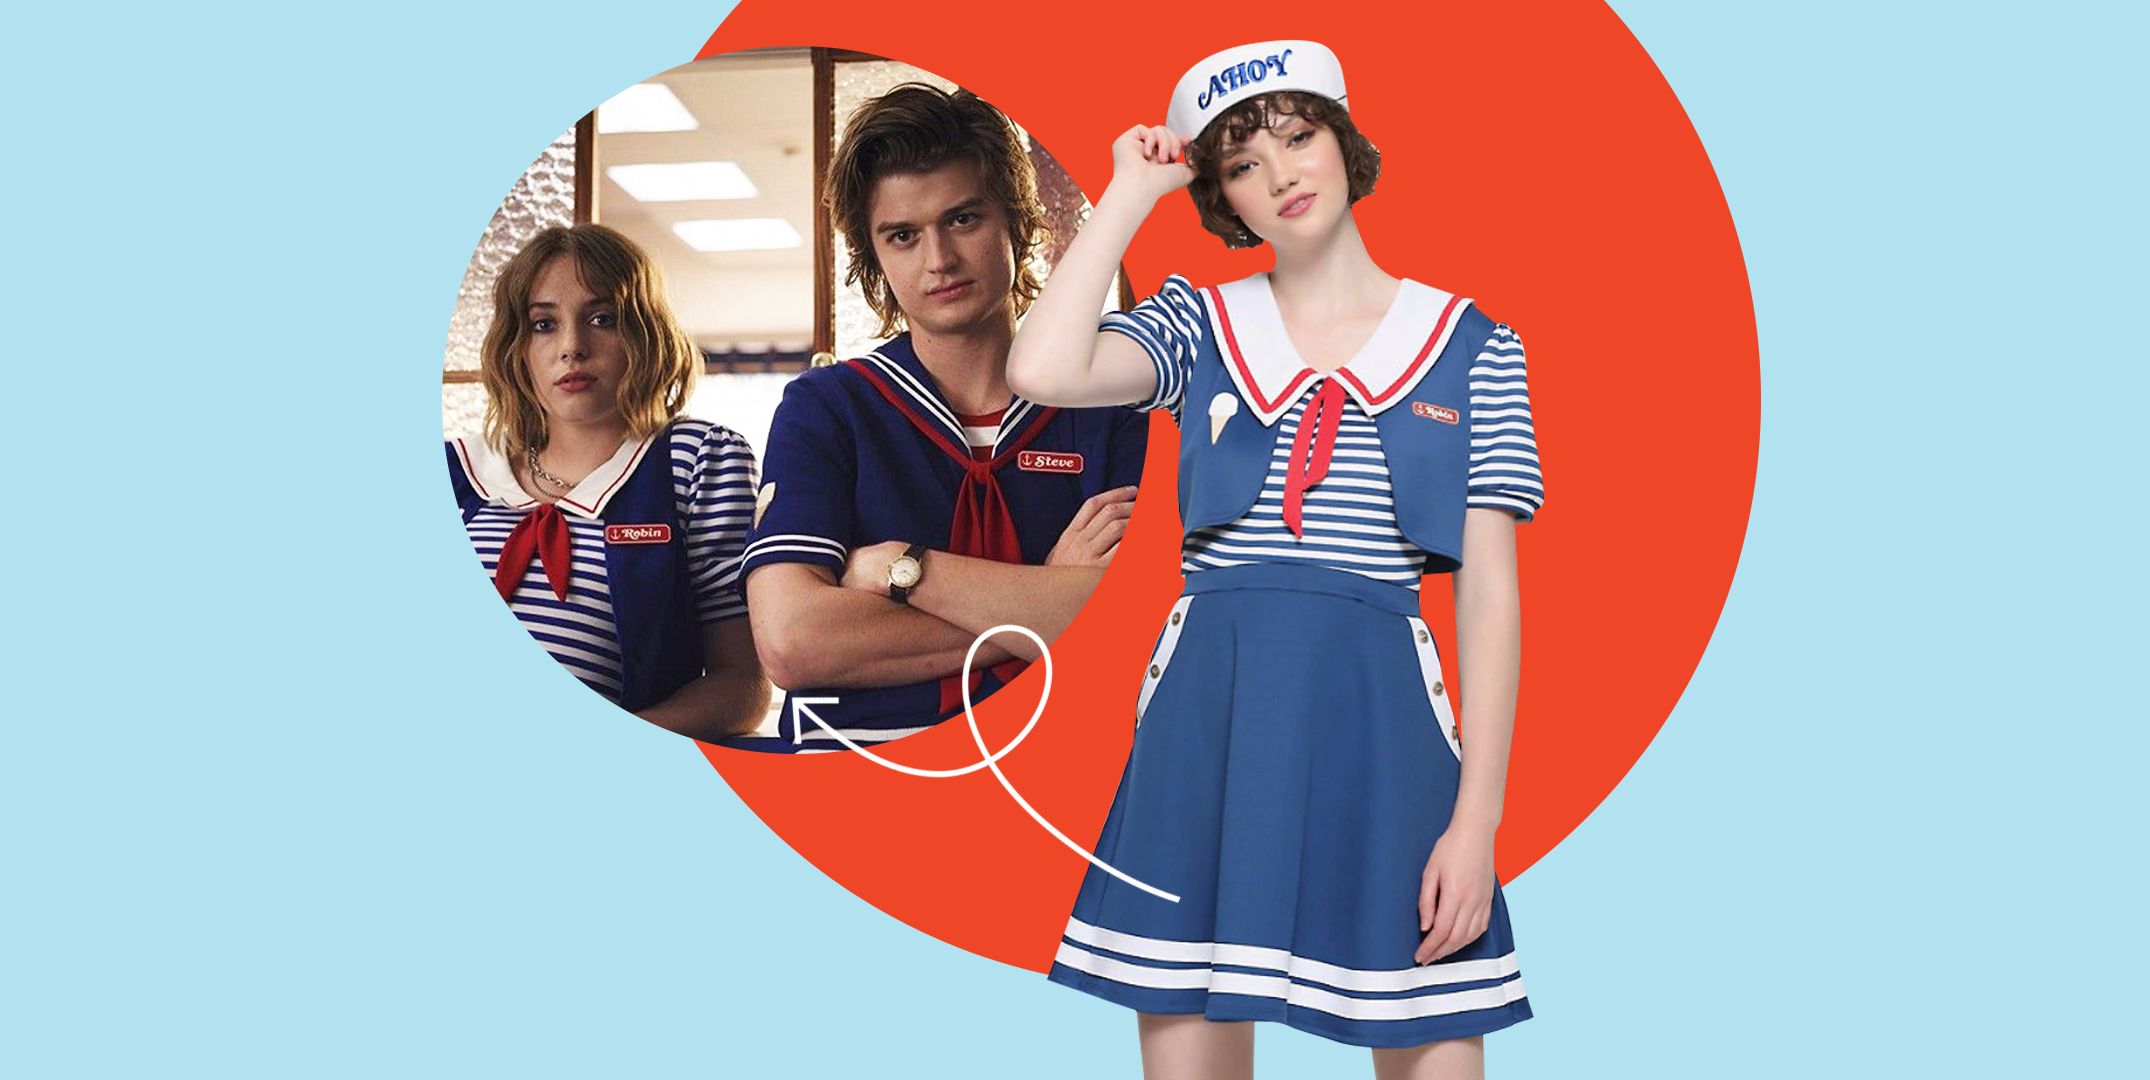 12 Stranger Things Halloween Costume Ideas Pop Culture Costumes